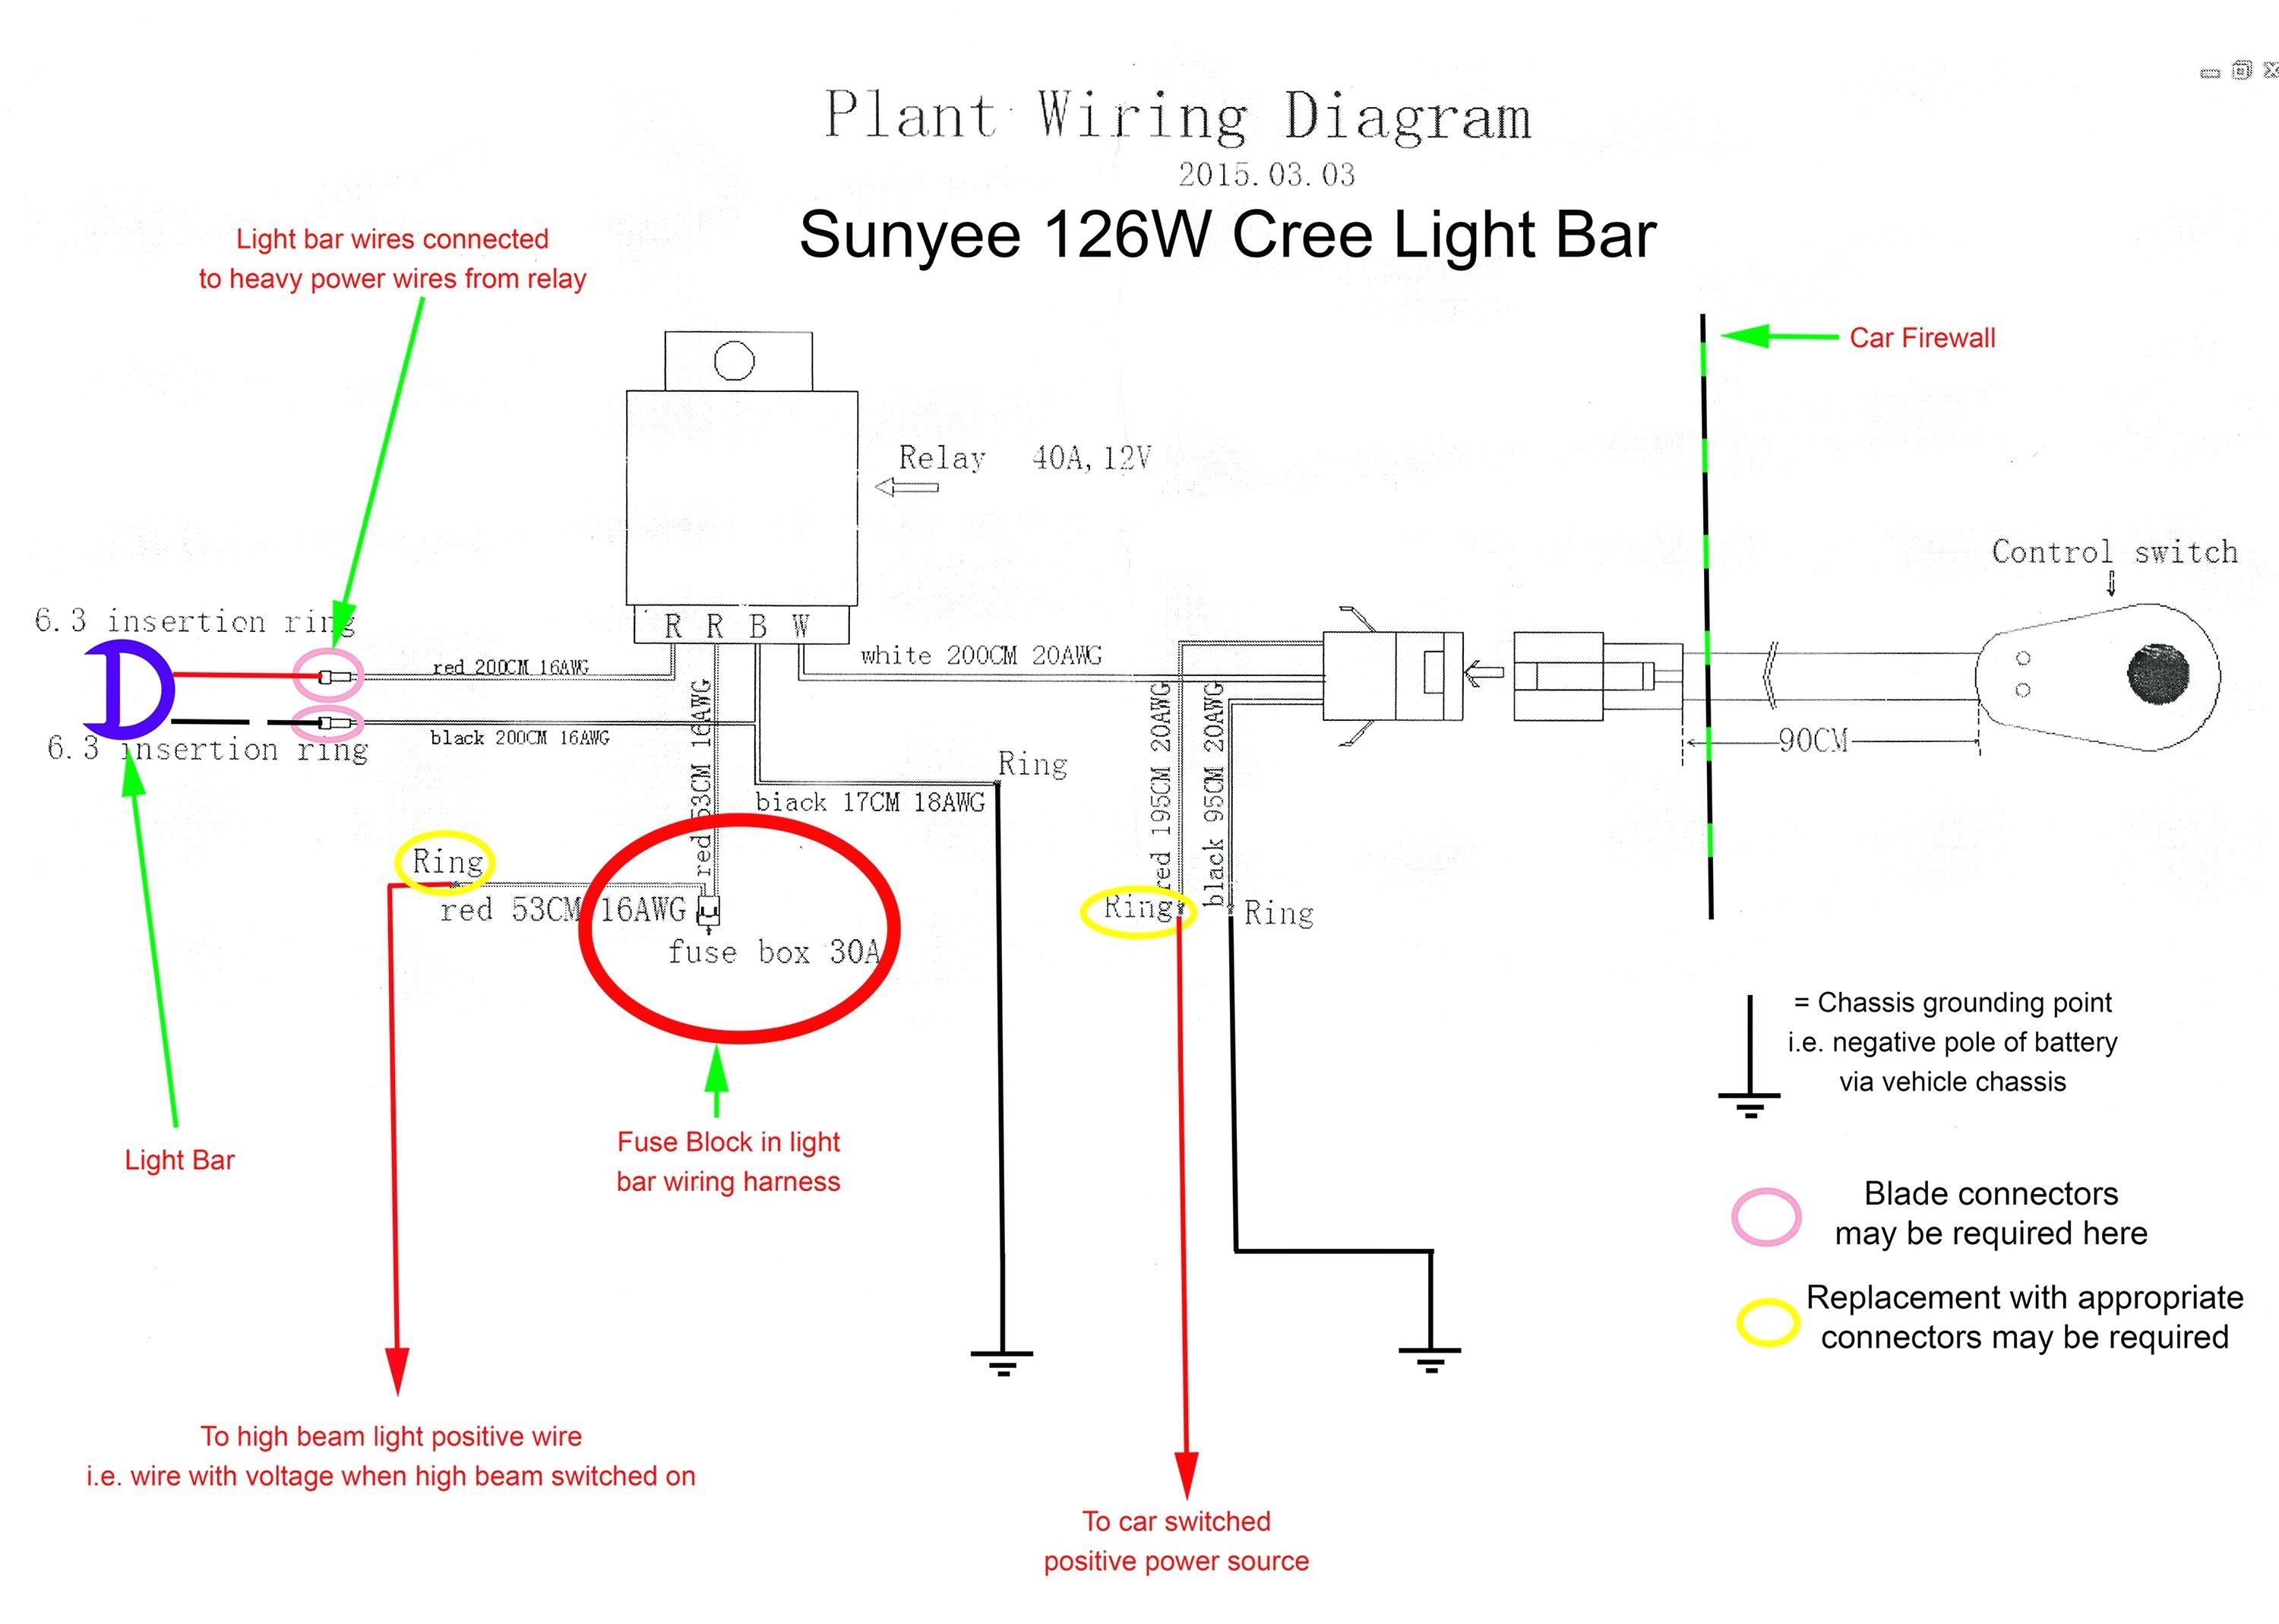 Light socket Wiring Diagram Wiring Diagram Plug Switch Light New 3 Way Wire Dryer Also Afif Of Light socket Wiring Diagram